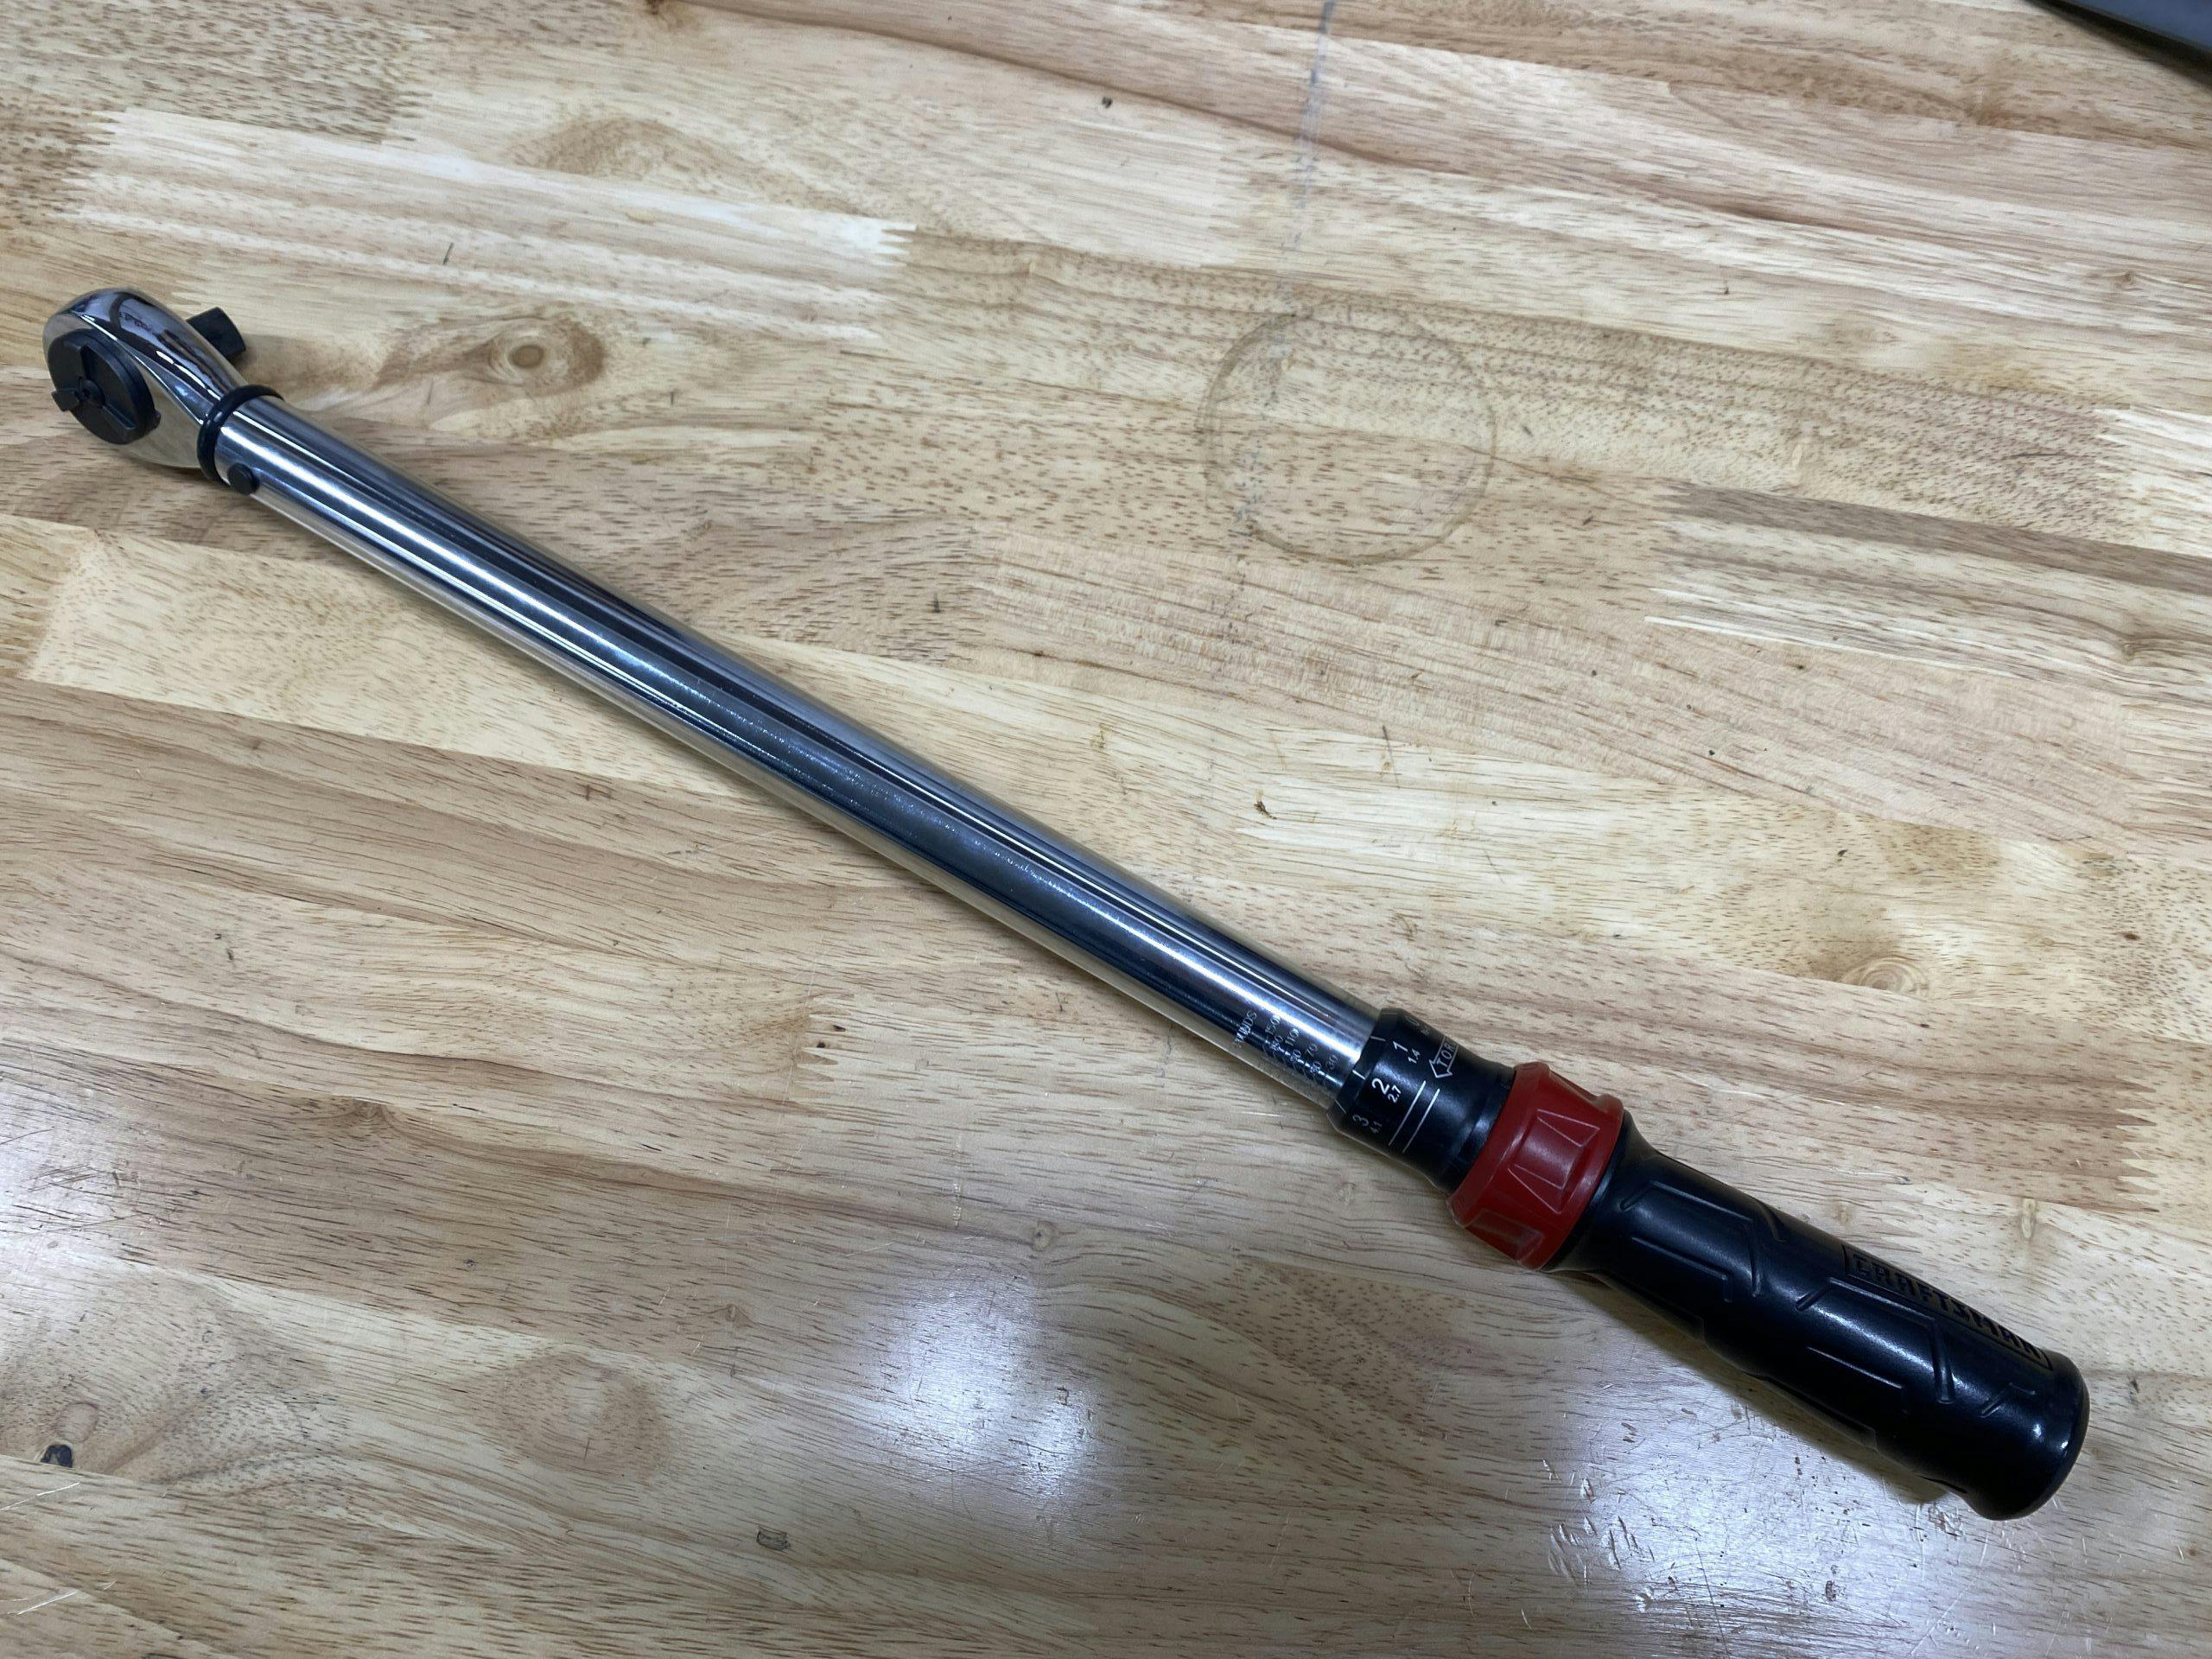 torque wrench on workbench